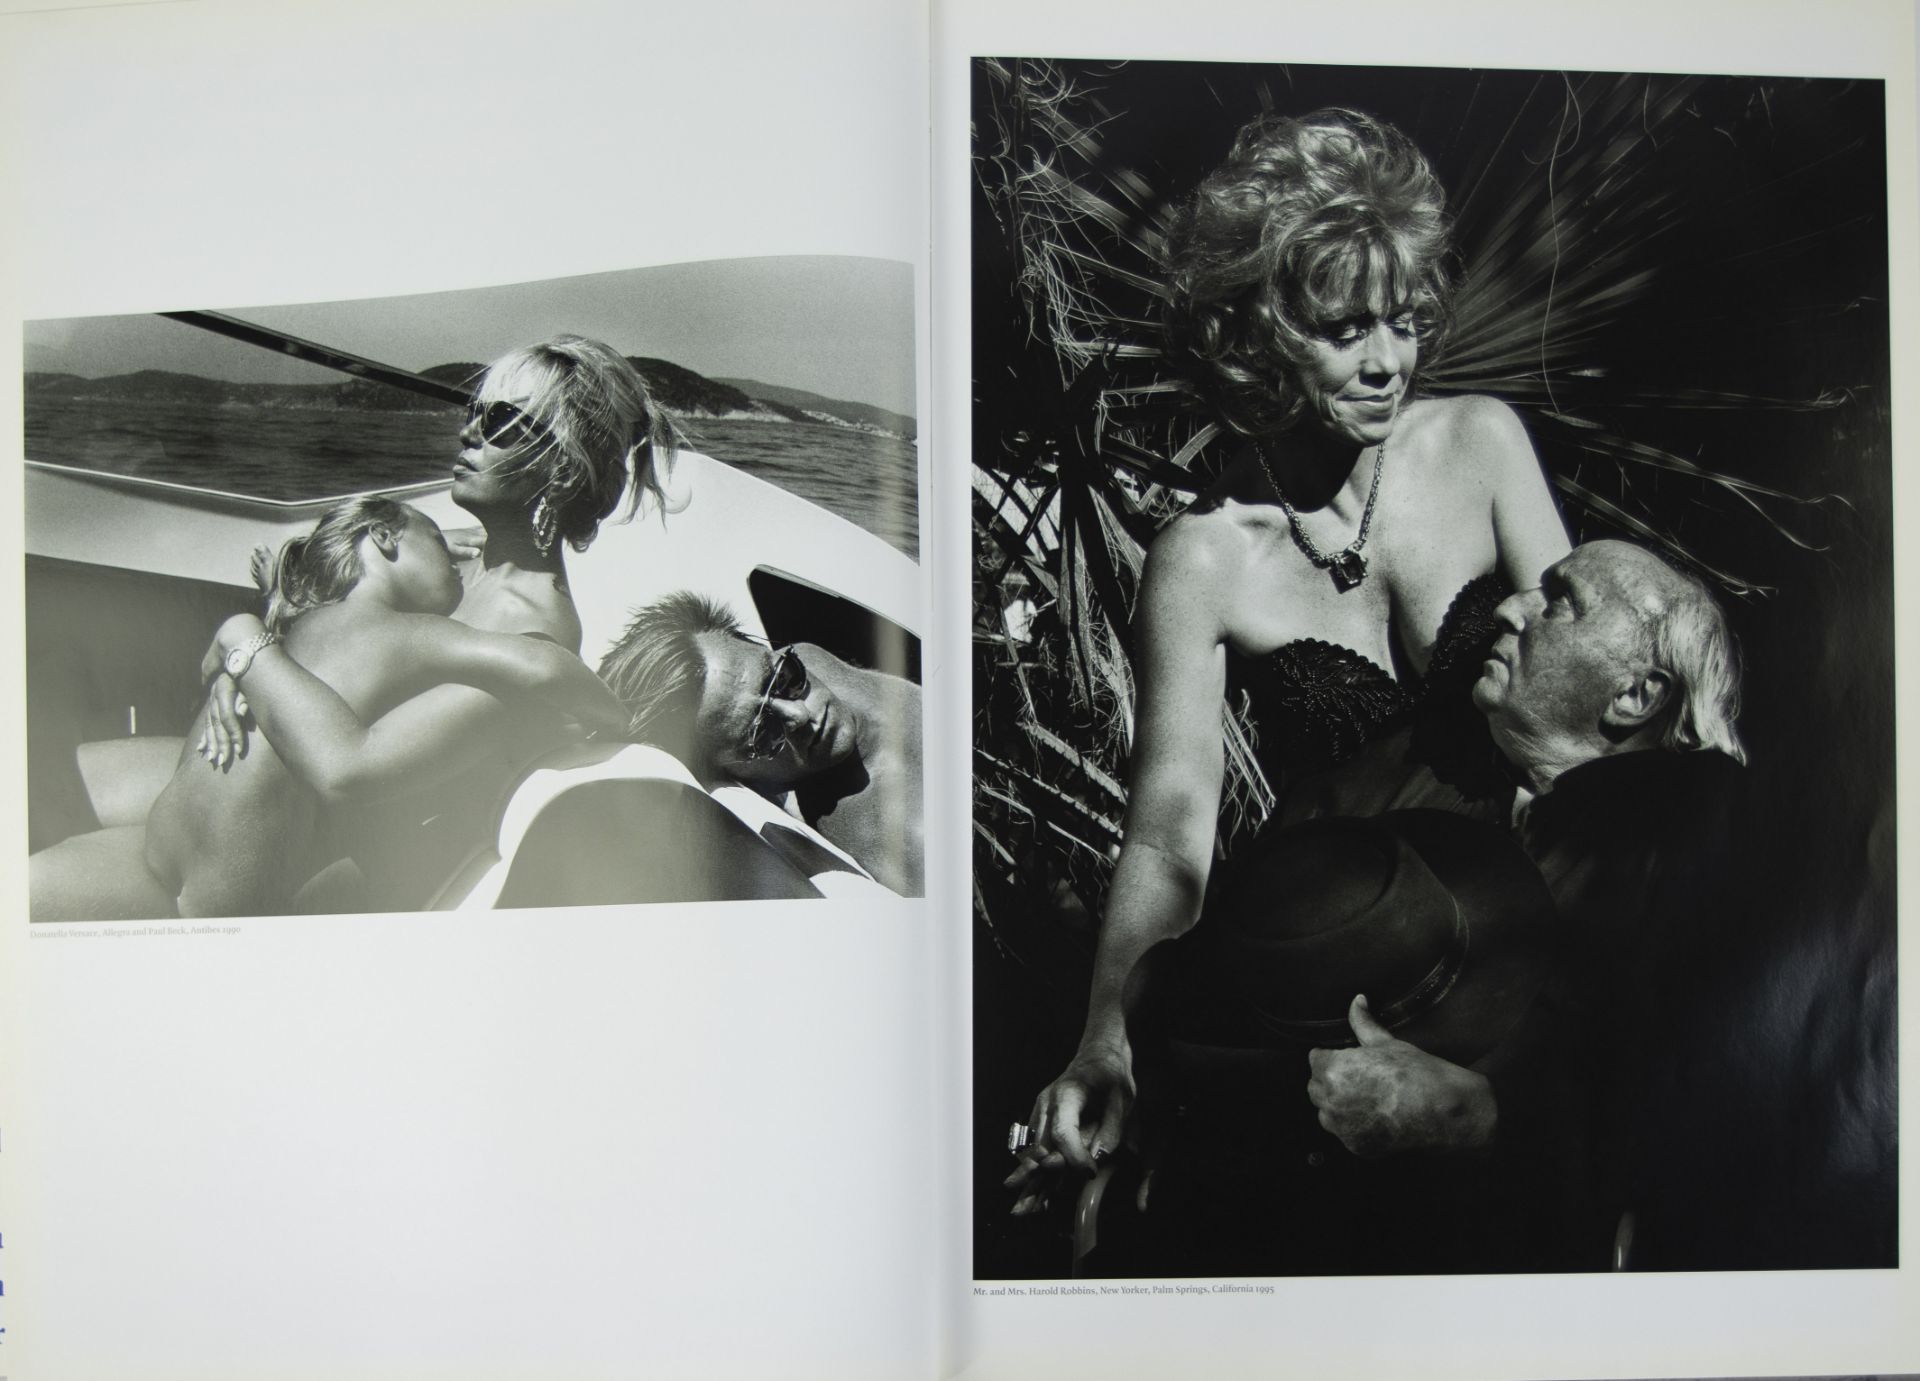 Large pancarte for book by Helmut Newton, publisher Tashen with various black and white photographs - Image 4 of 5